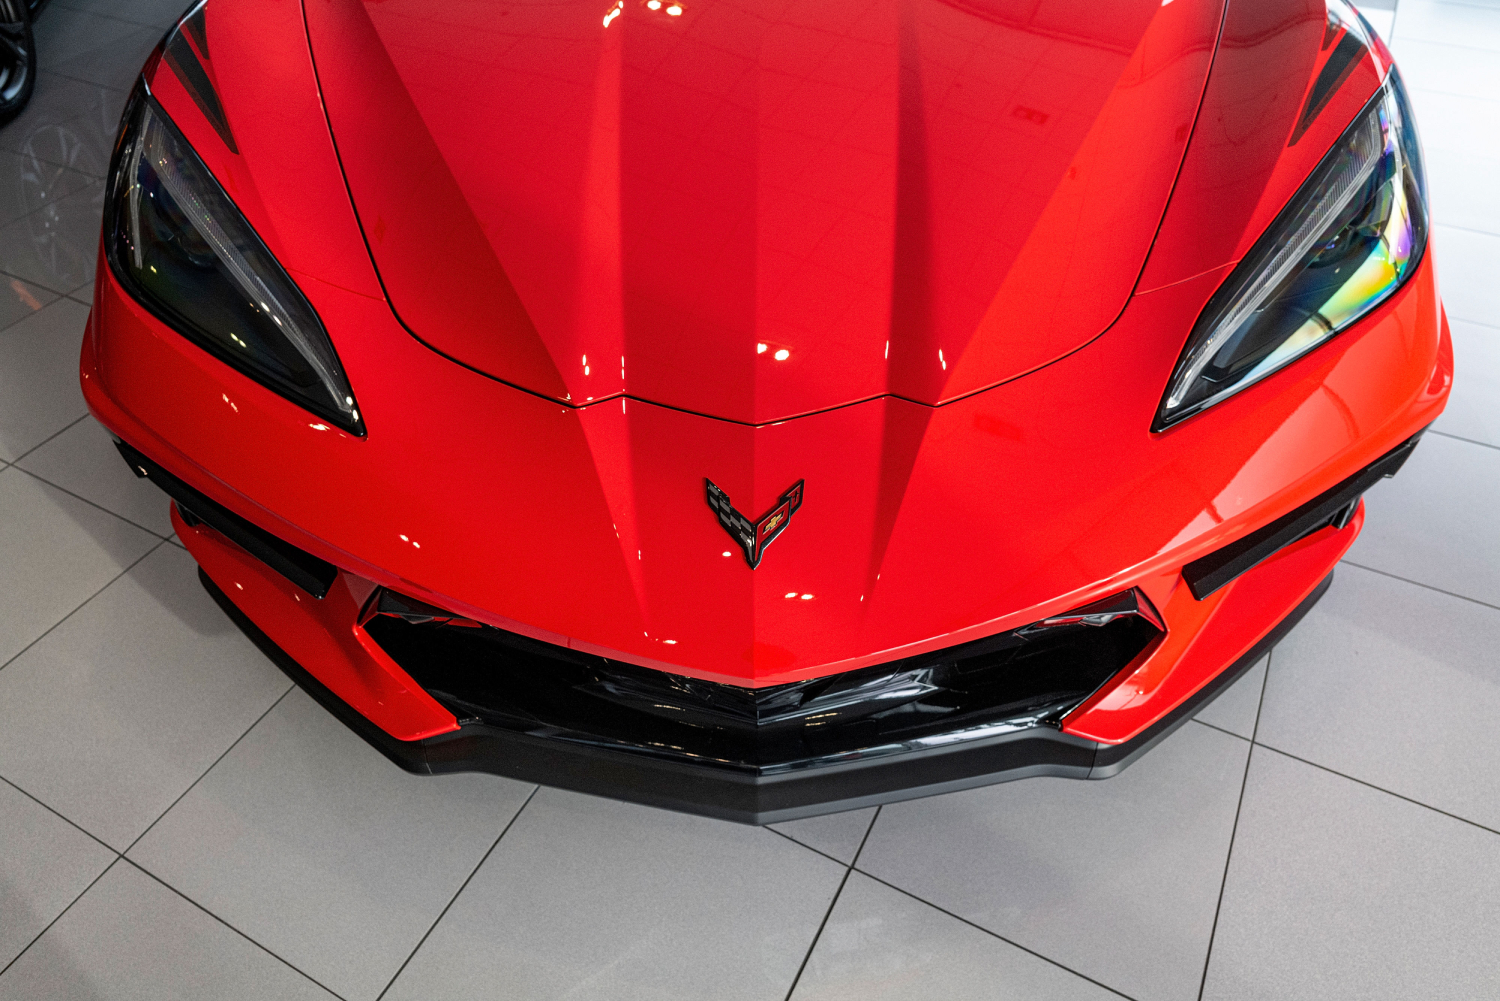 A red 2021 Chevrolet Corvette on display at a dealership